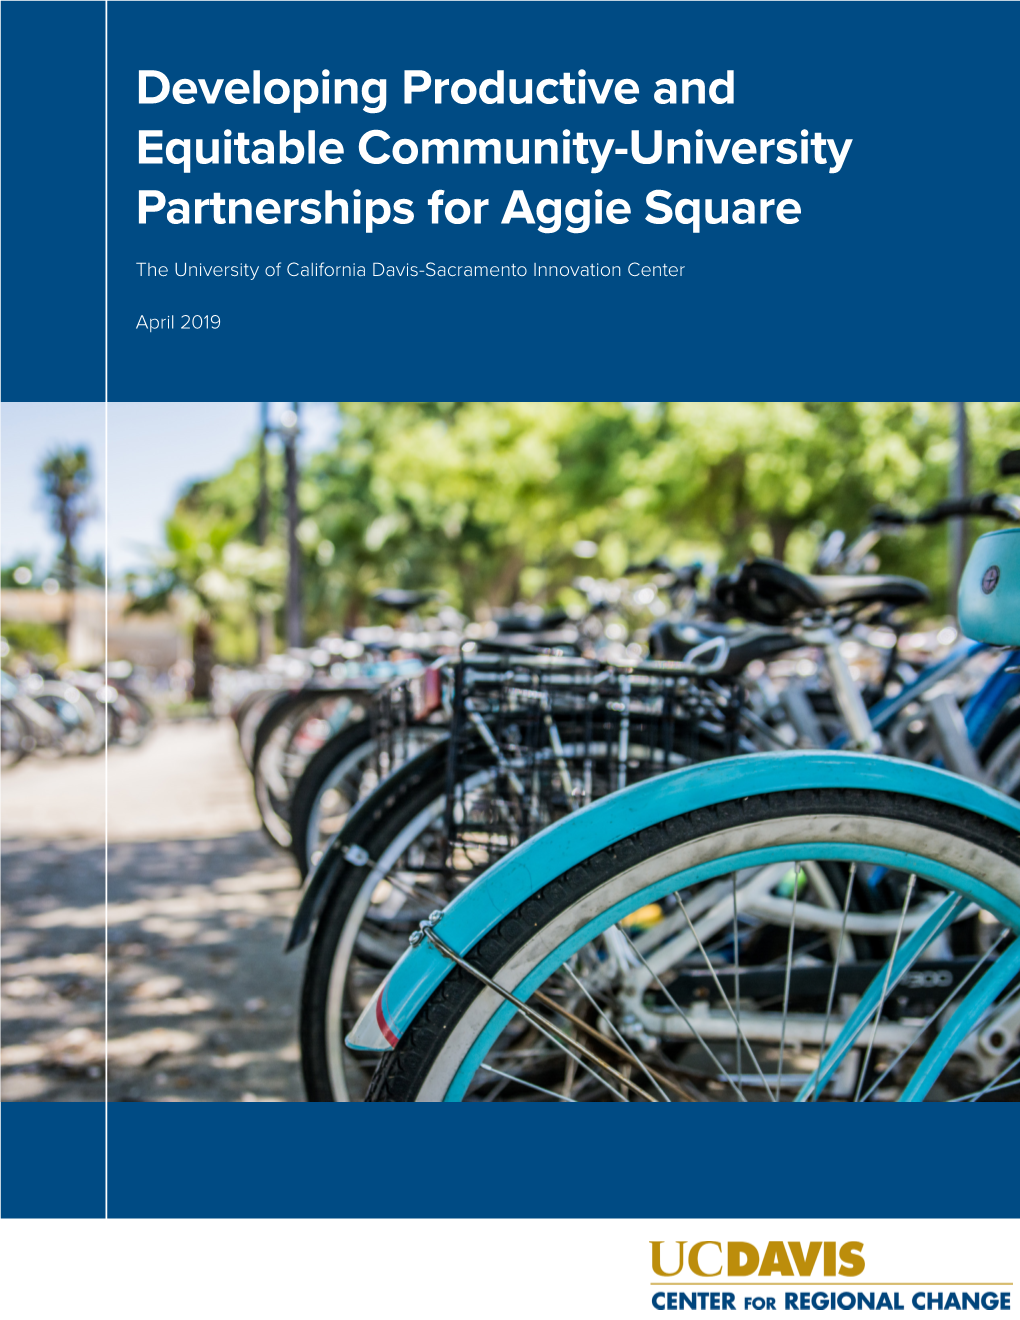 Developing Productive and Equitable Community-University Partnerships for Aggie Square